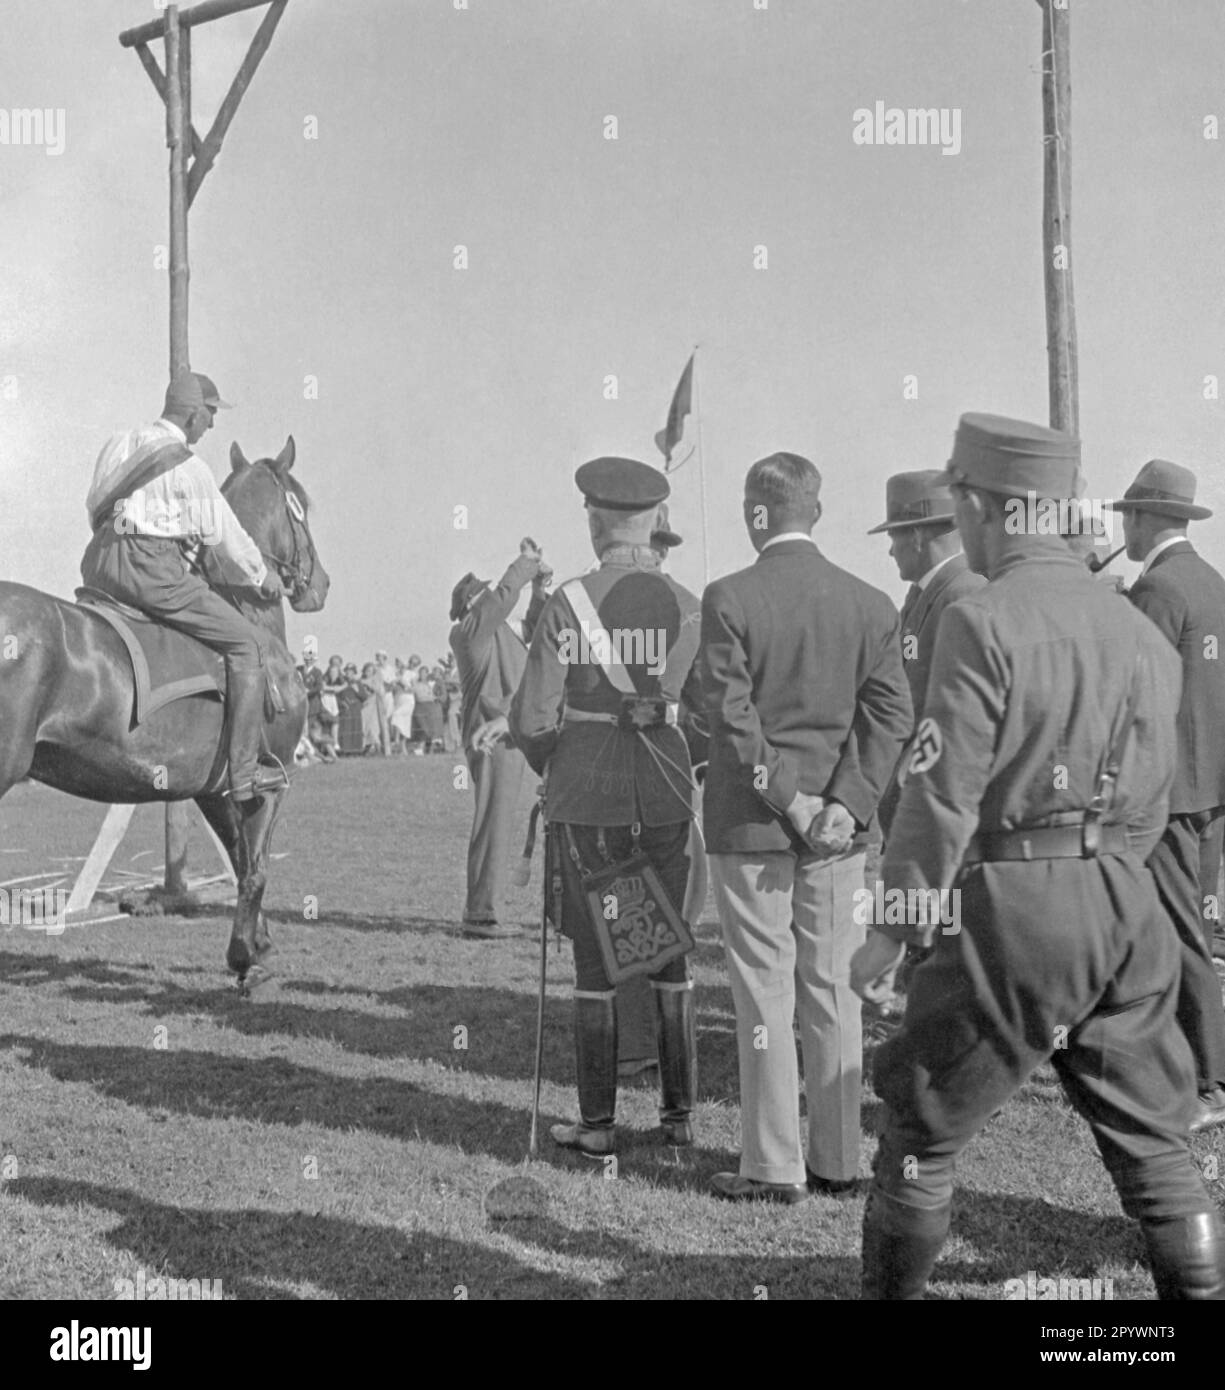 Rider participates in ring riding in Warnemünde. In ring riding, a lance is put through a ring hanging from the scaffold. Spectators stand next to the scaffold. A man wears a uniform of the Prussian army. Right in the picture is a SA man. Stock Photo